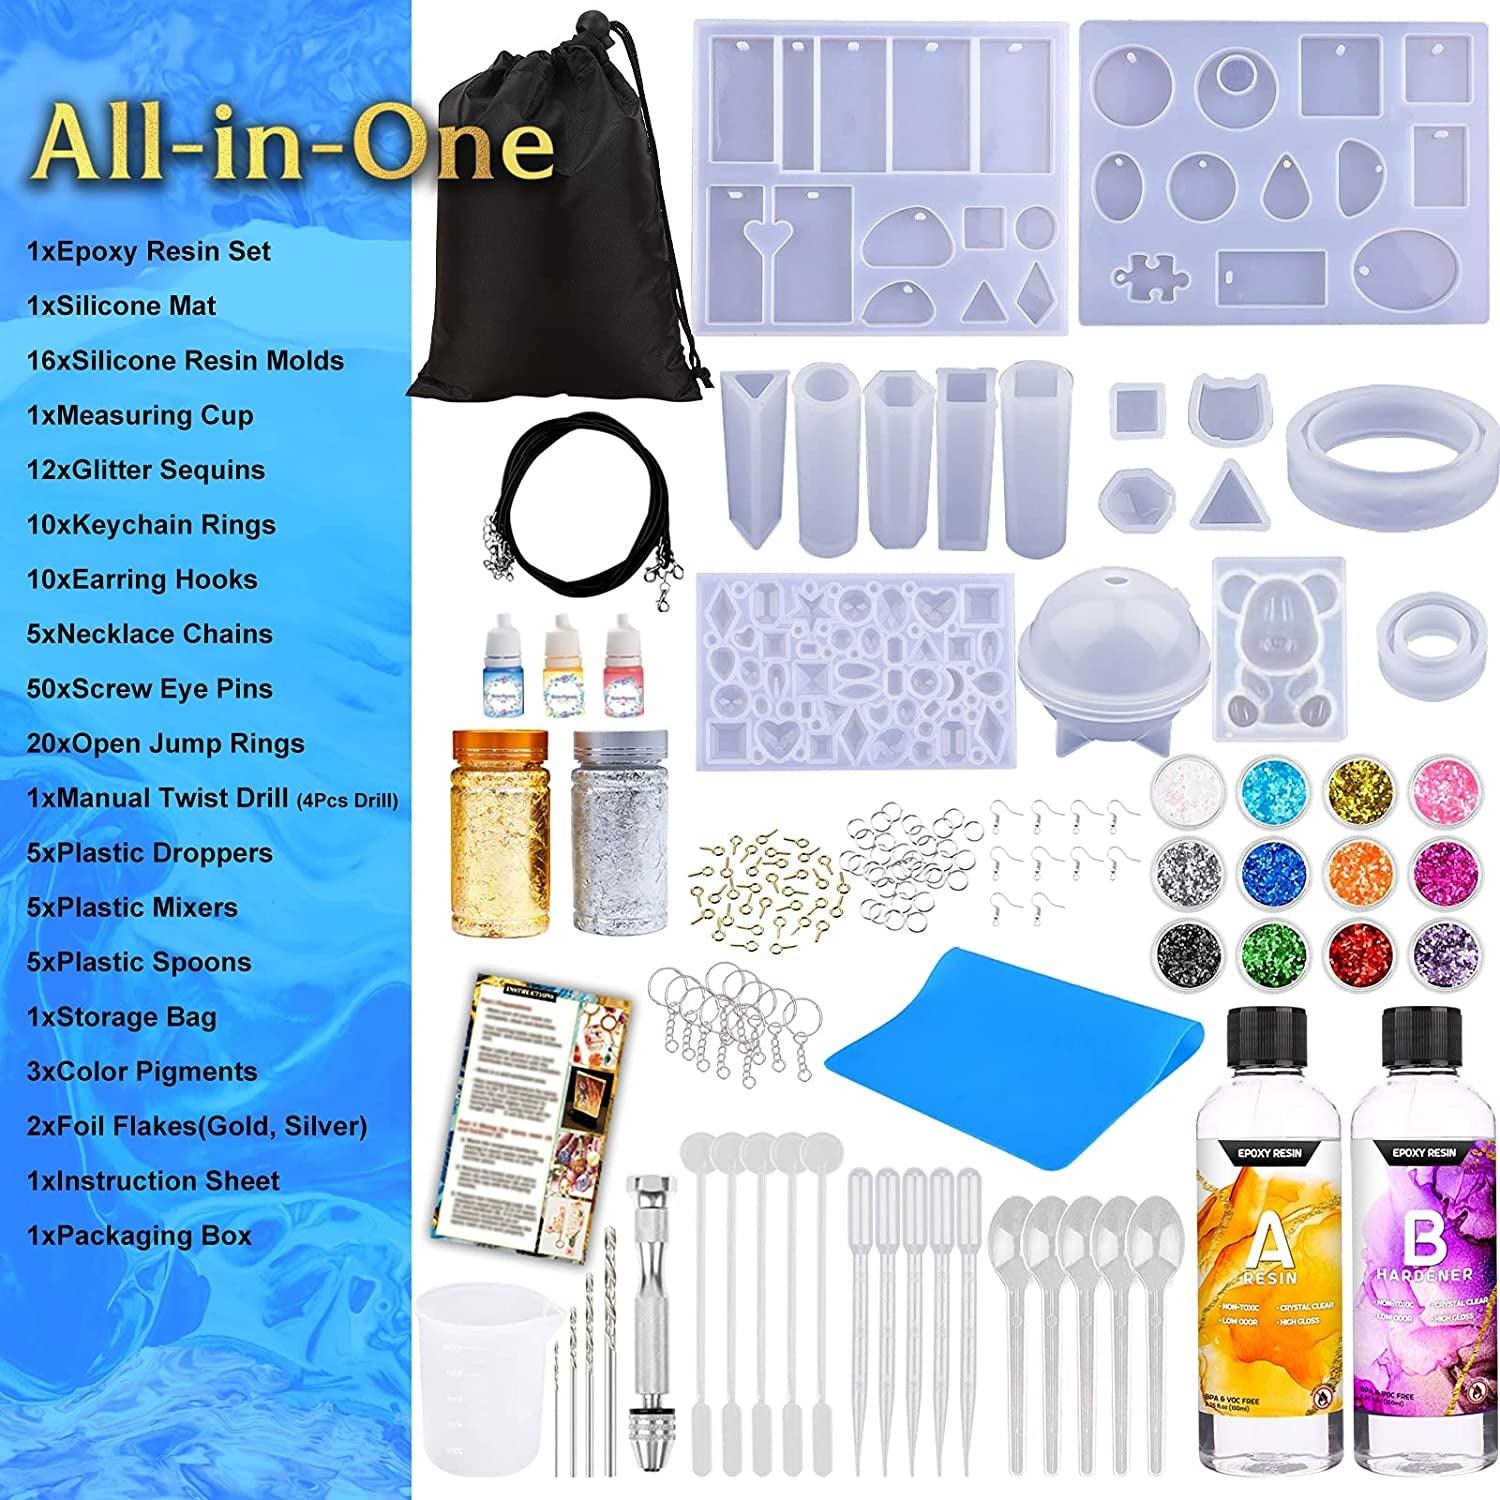 Epoxy Resin Silicone Molds Starter Kit All in One Home Decor Art Clear Craft Kit Storage Bag Spoons Gold Foil Flakes - WoodArtSupply